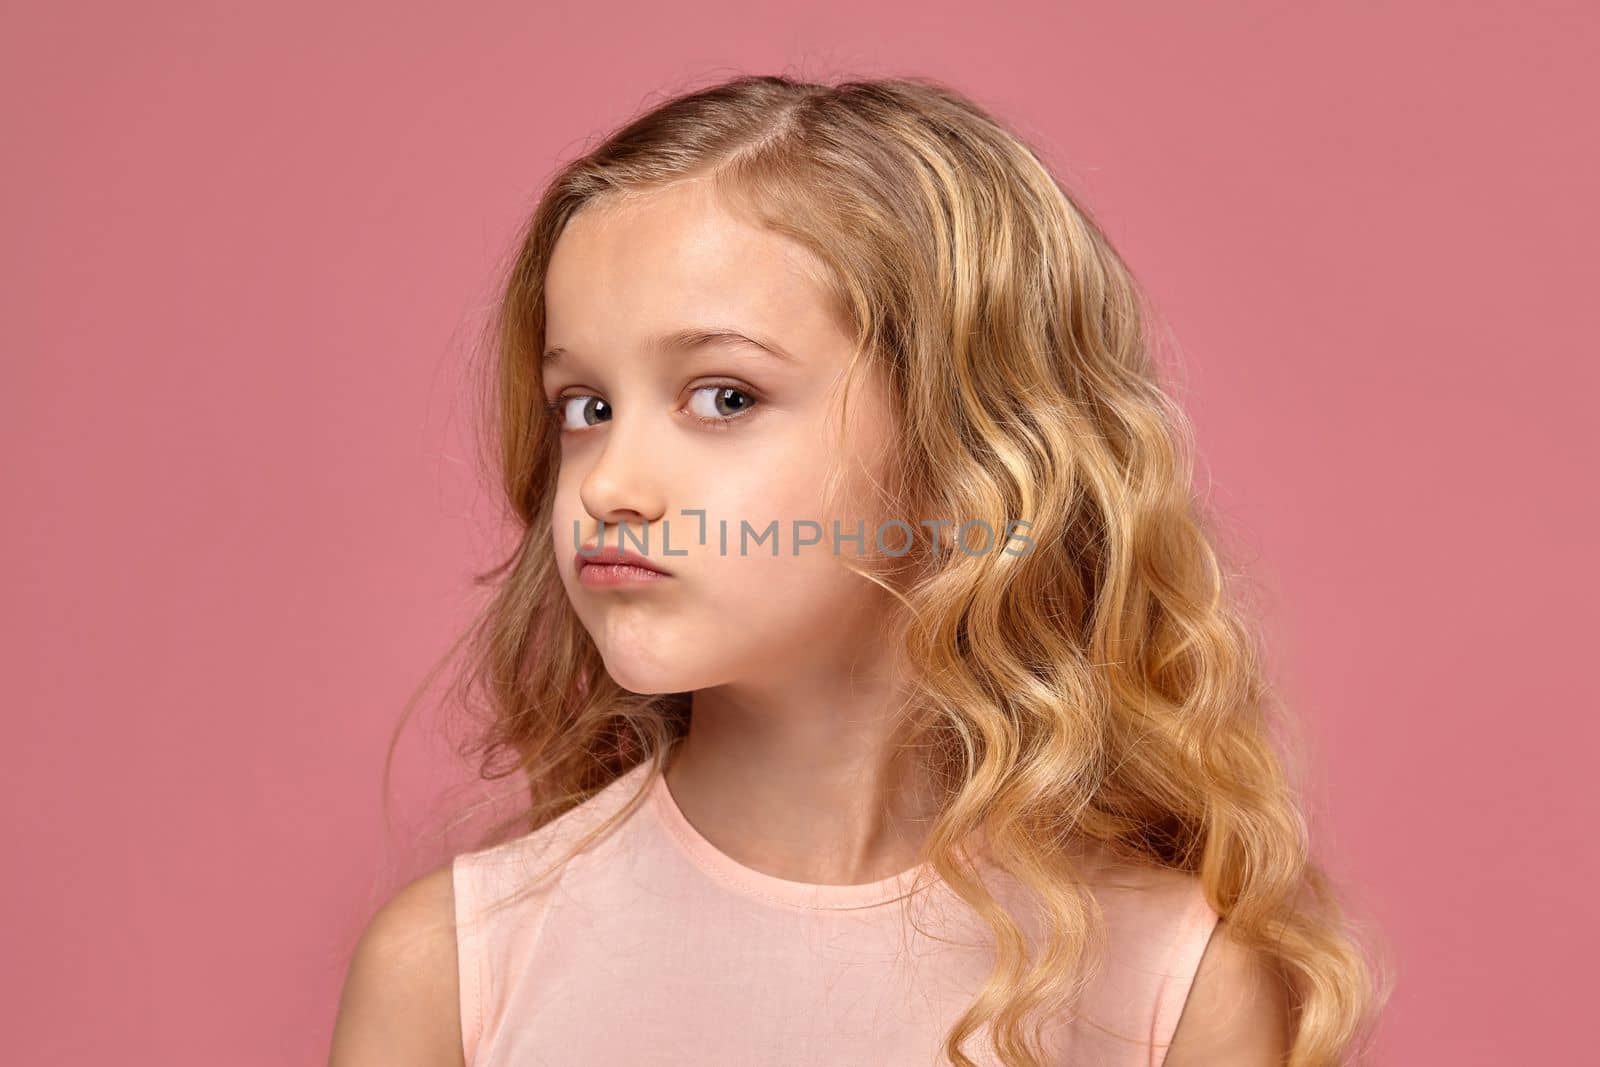 Beautiful little girl with a blond curly hair, in a pink dress poses for the camera and looks offended, on a pink background